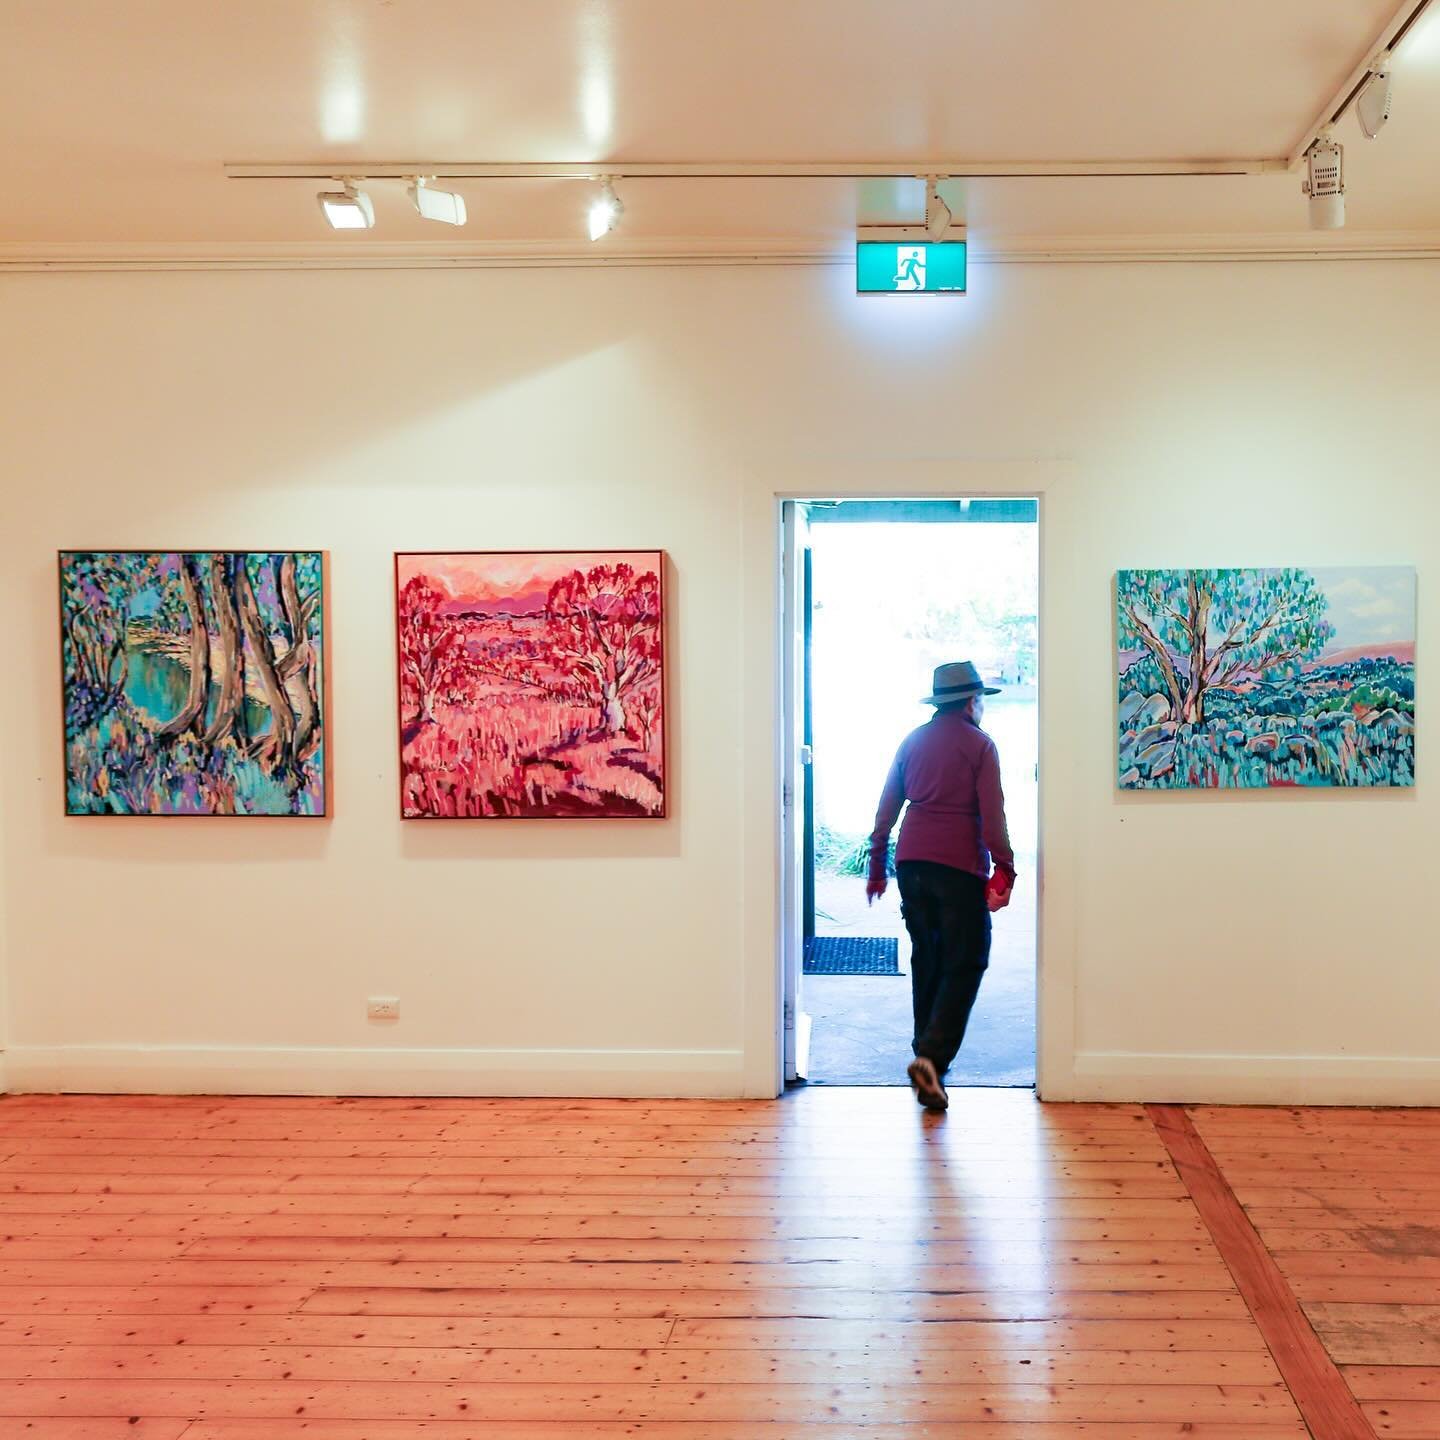 Don&rsquo;t miss tonight&rsquo;s official opening of our new exhibitions:

Sophie Ryan, Golden hour - Homestead Gallery 1
Joan McKay, Touched by our nature - Homestead Gallery 2

Please join us from 5 pm as guest speaker @barbierobinson56 opens both 